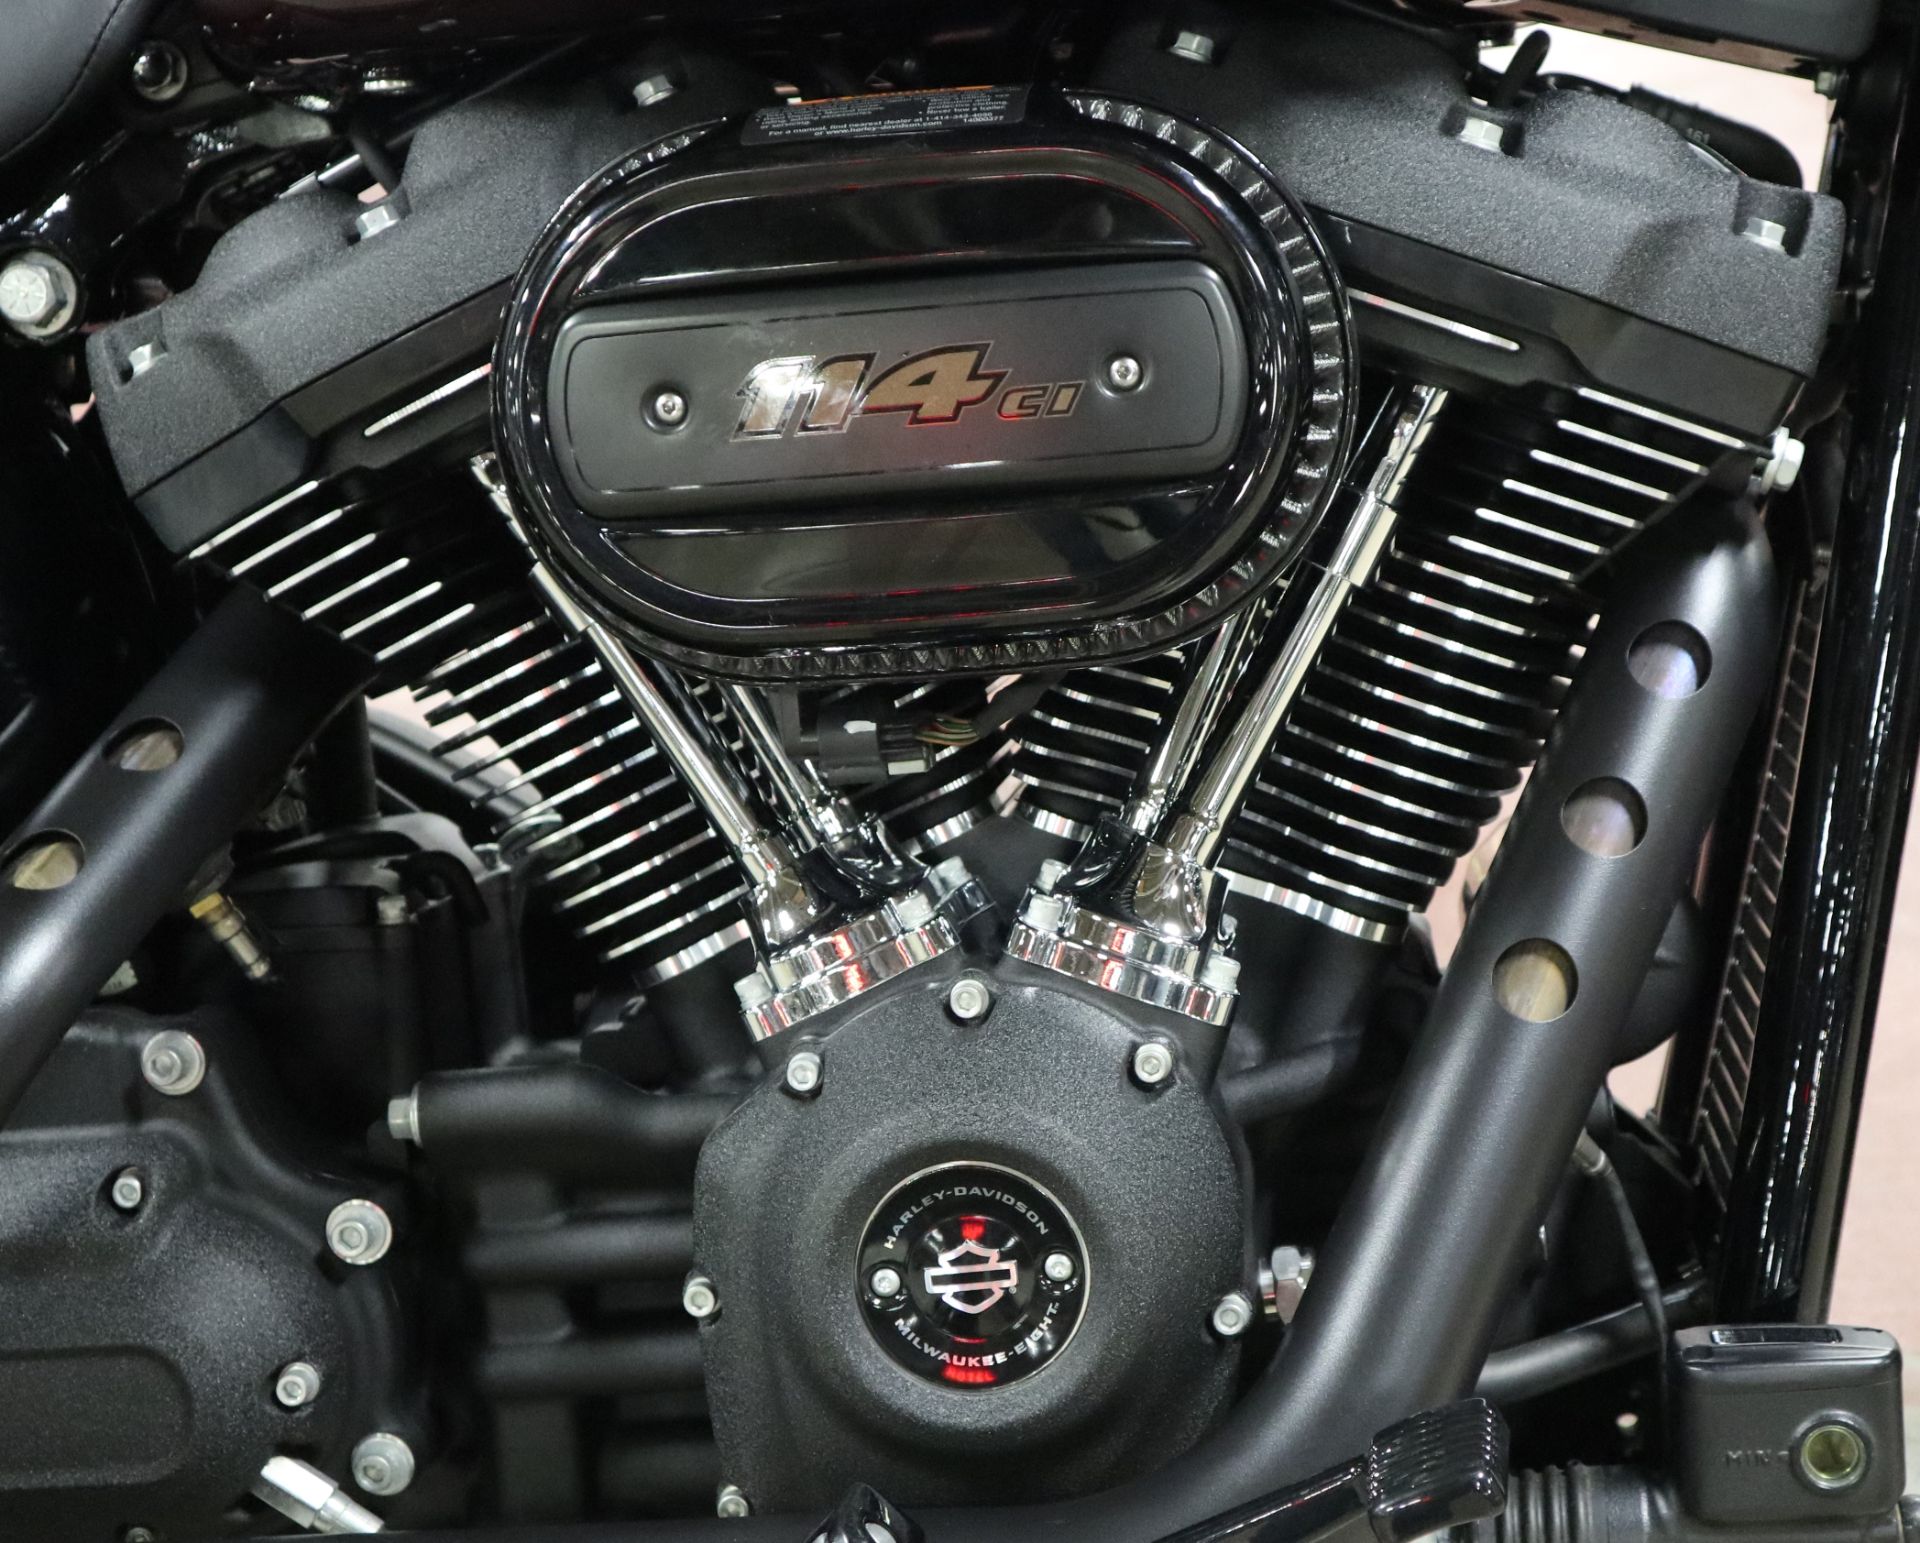 2021 Harley-Davidson Low Rider®S in New London, Connecticut - Photo 17